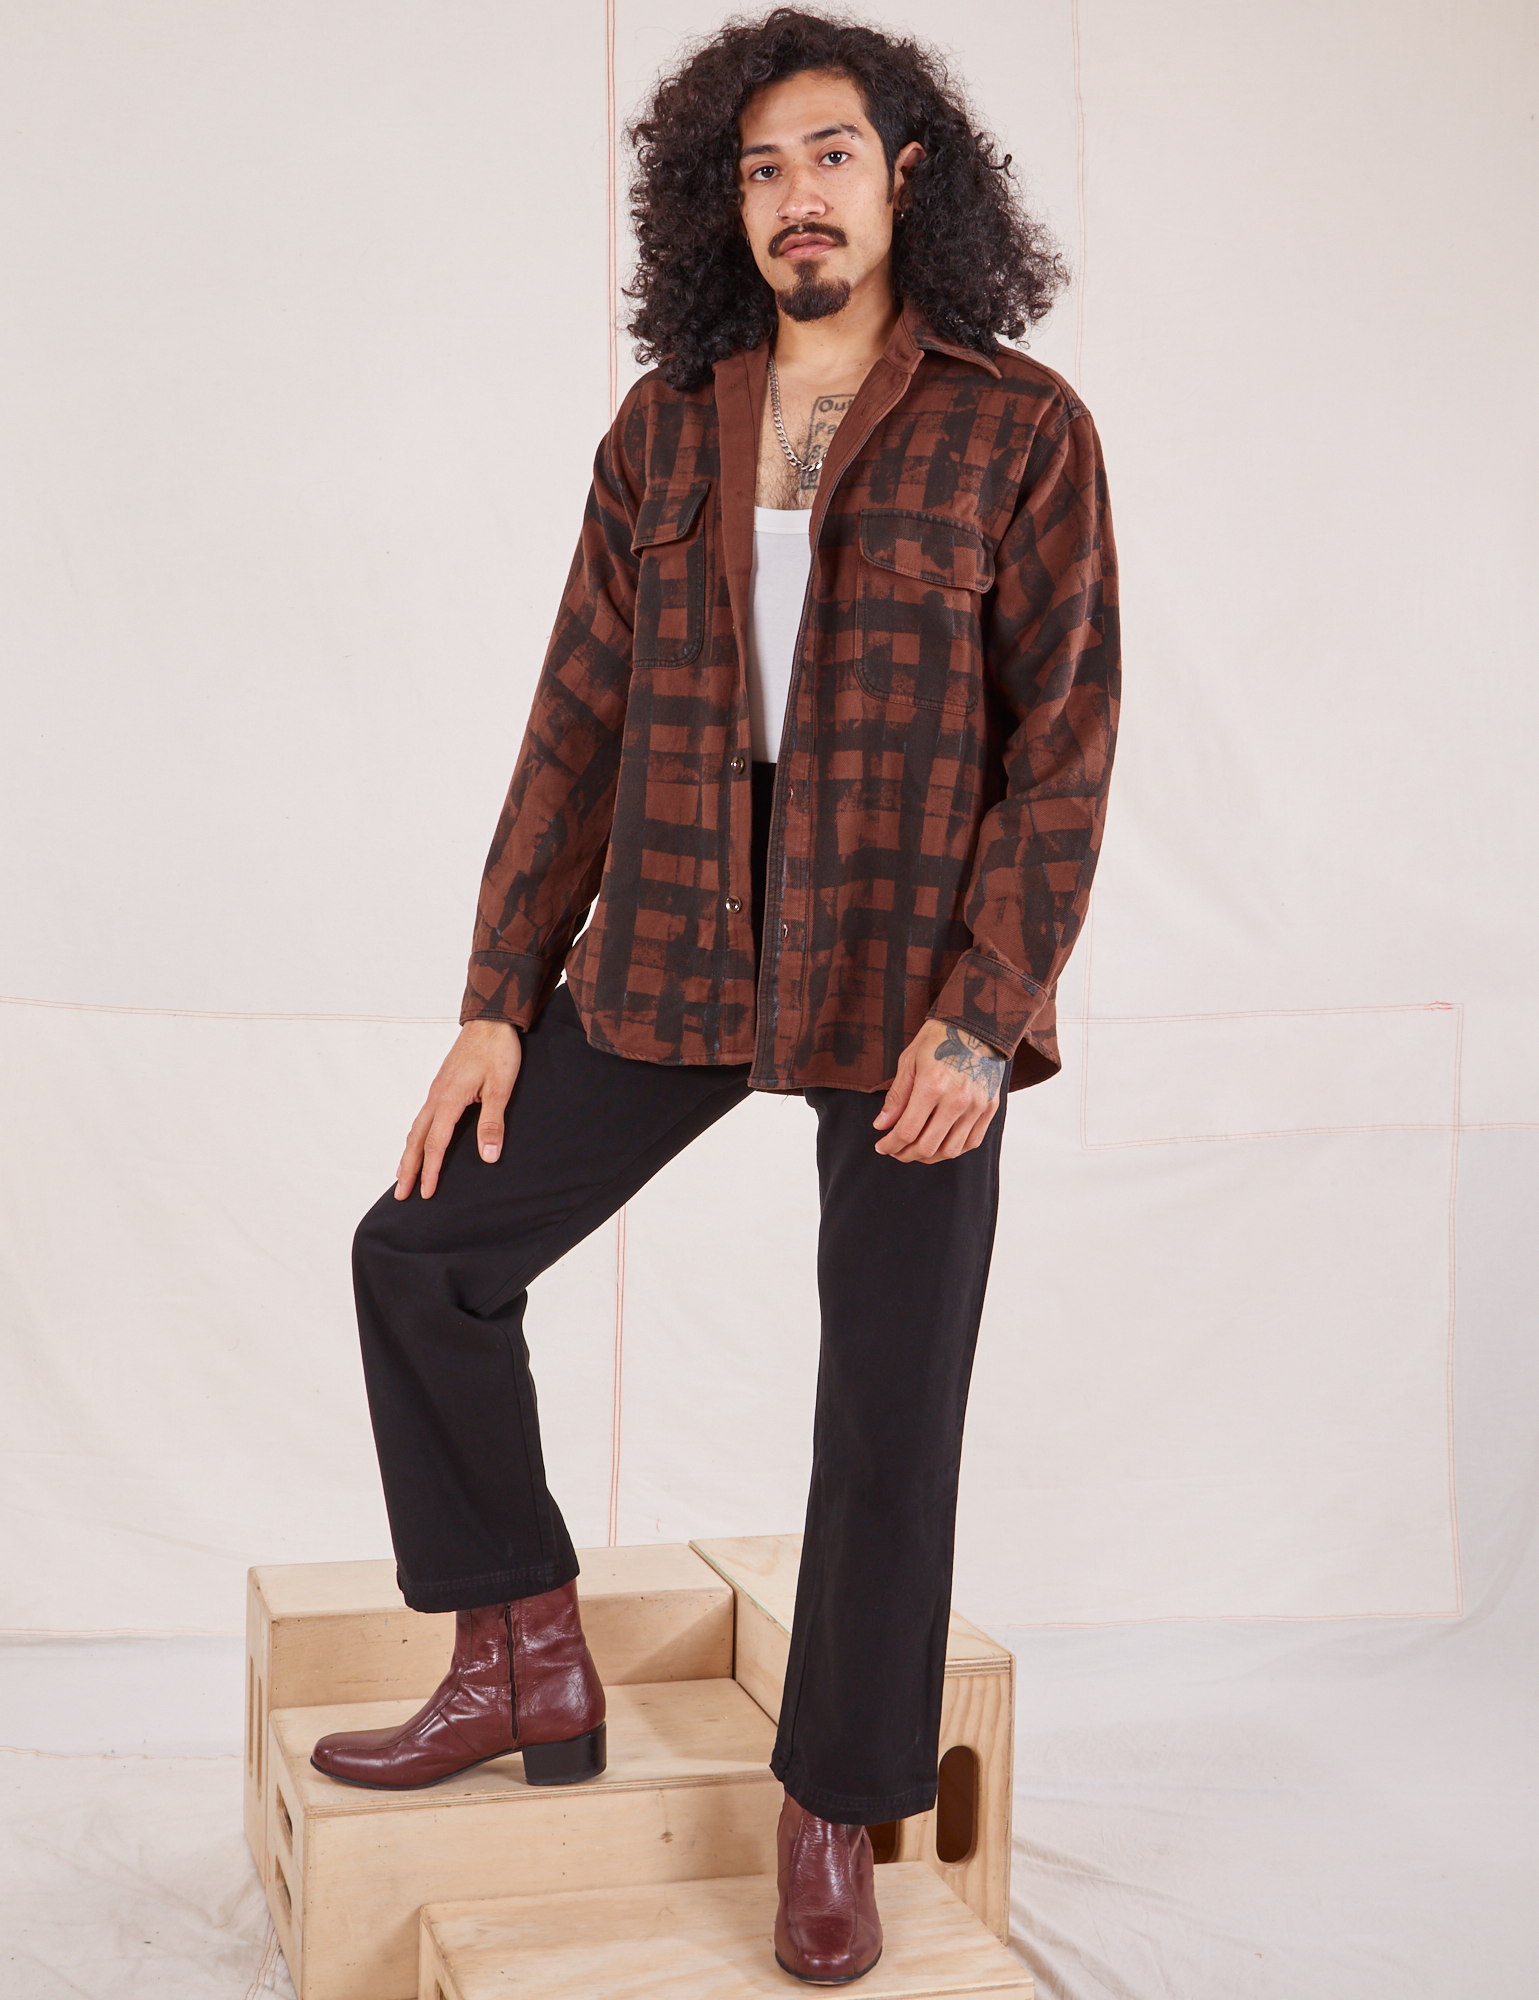 Jesse is wearing Plaid Flannel Overshirt in Fudgesicle Brown and black Work Pants